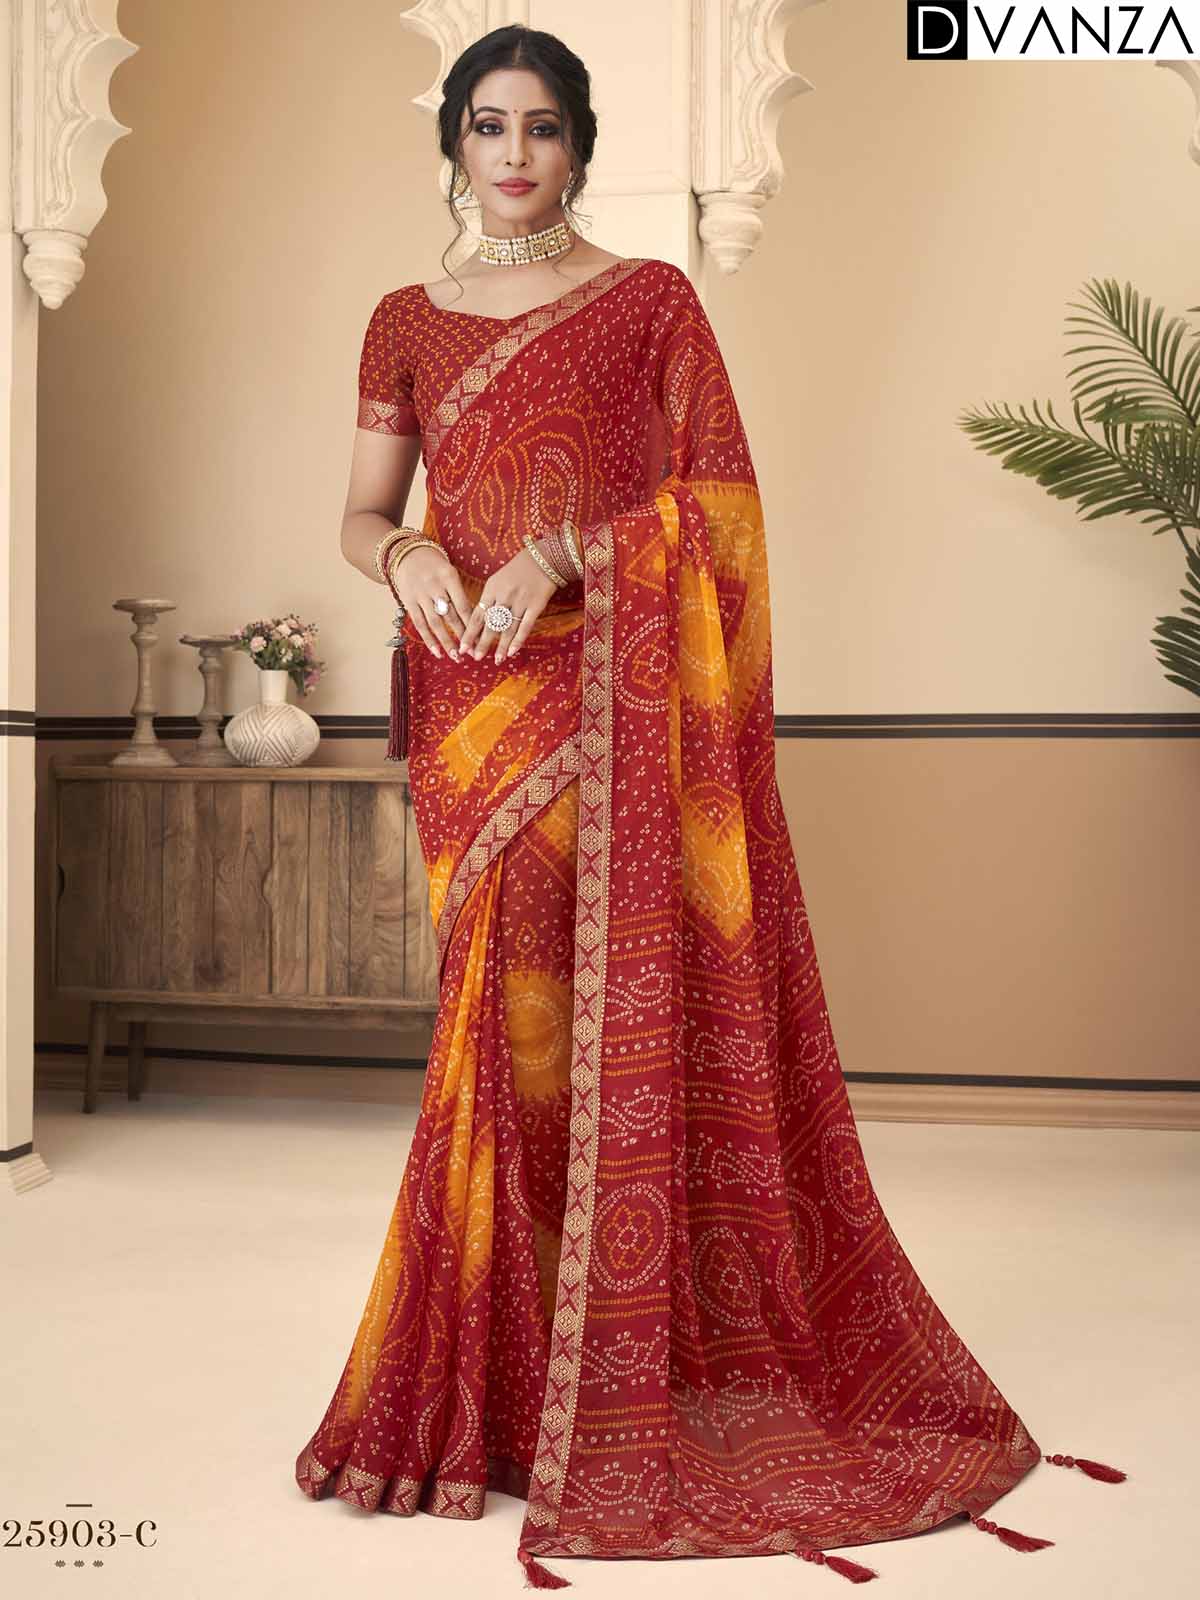 Buy Bandhani Printed Chiffon Saree with Attached Border, Jari, and Tassels Online in Best Quality - dvz0003812